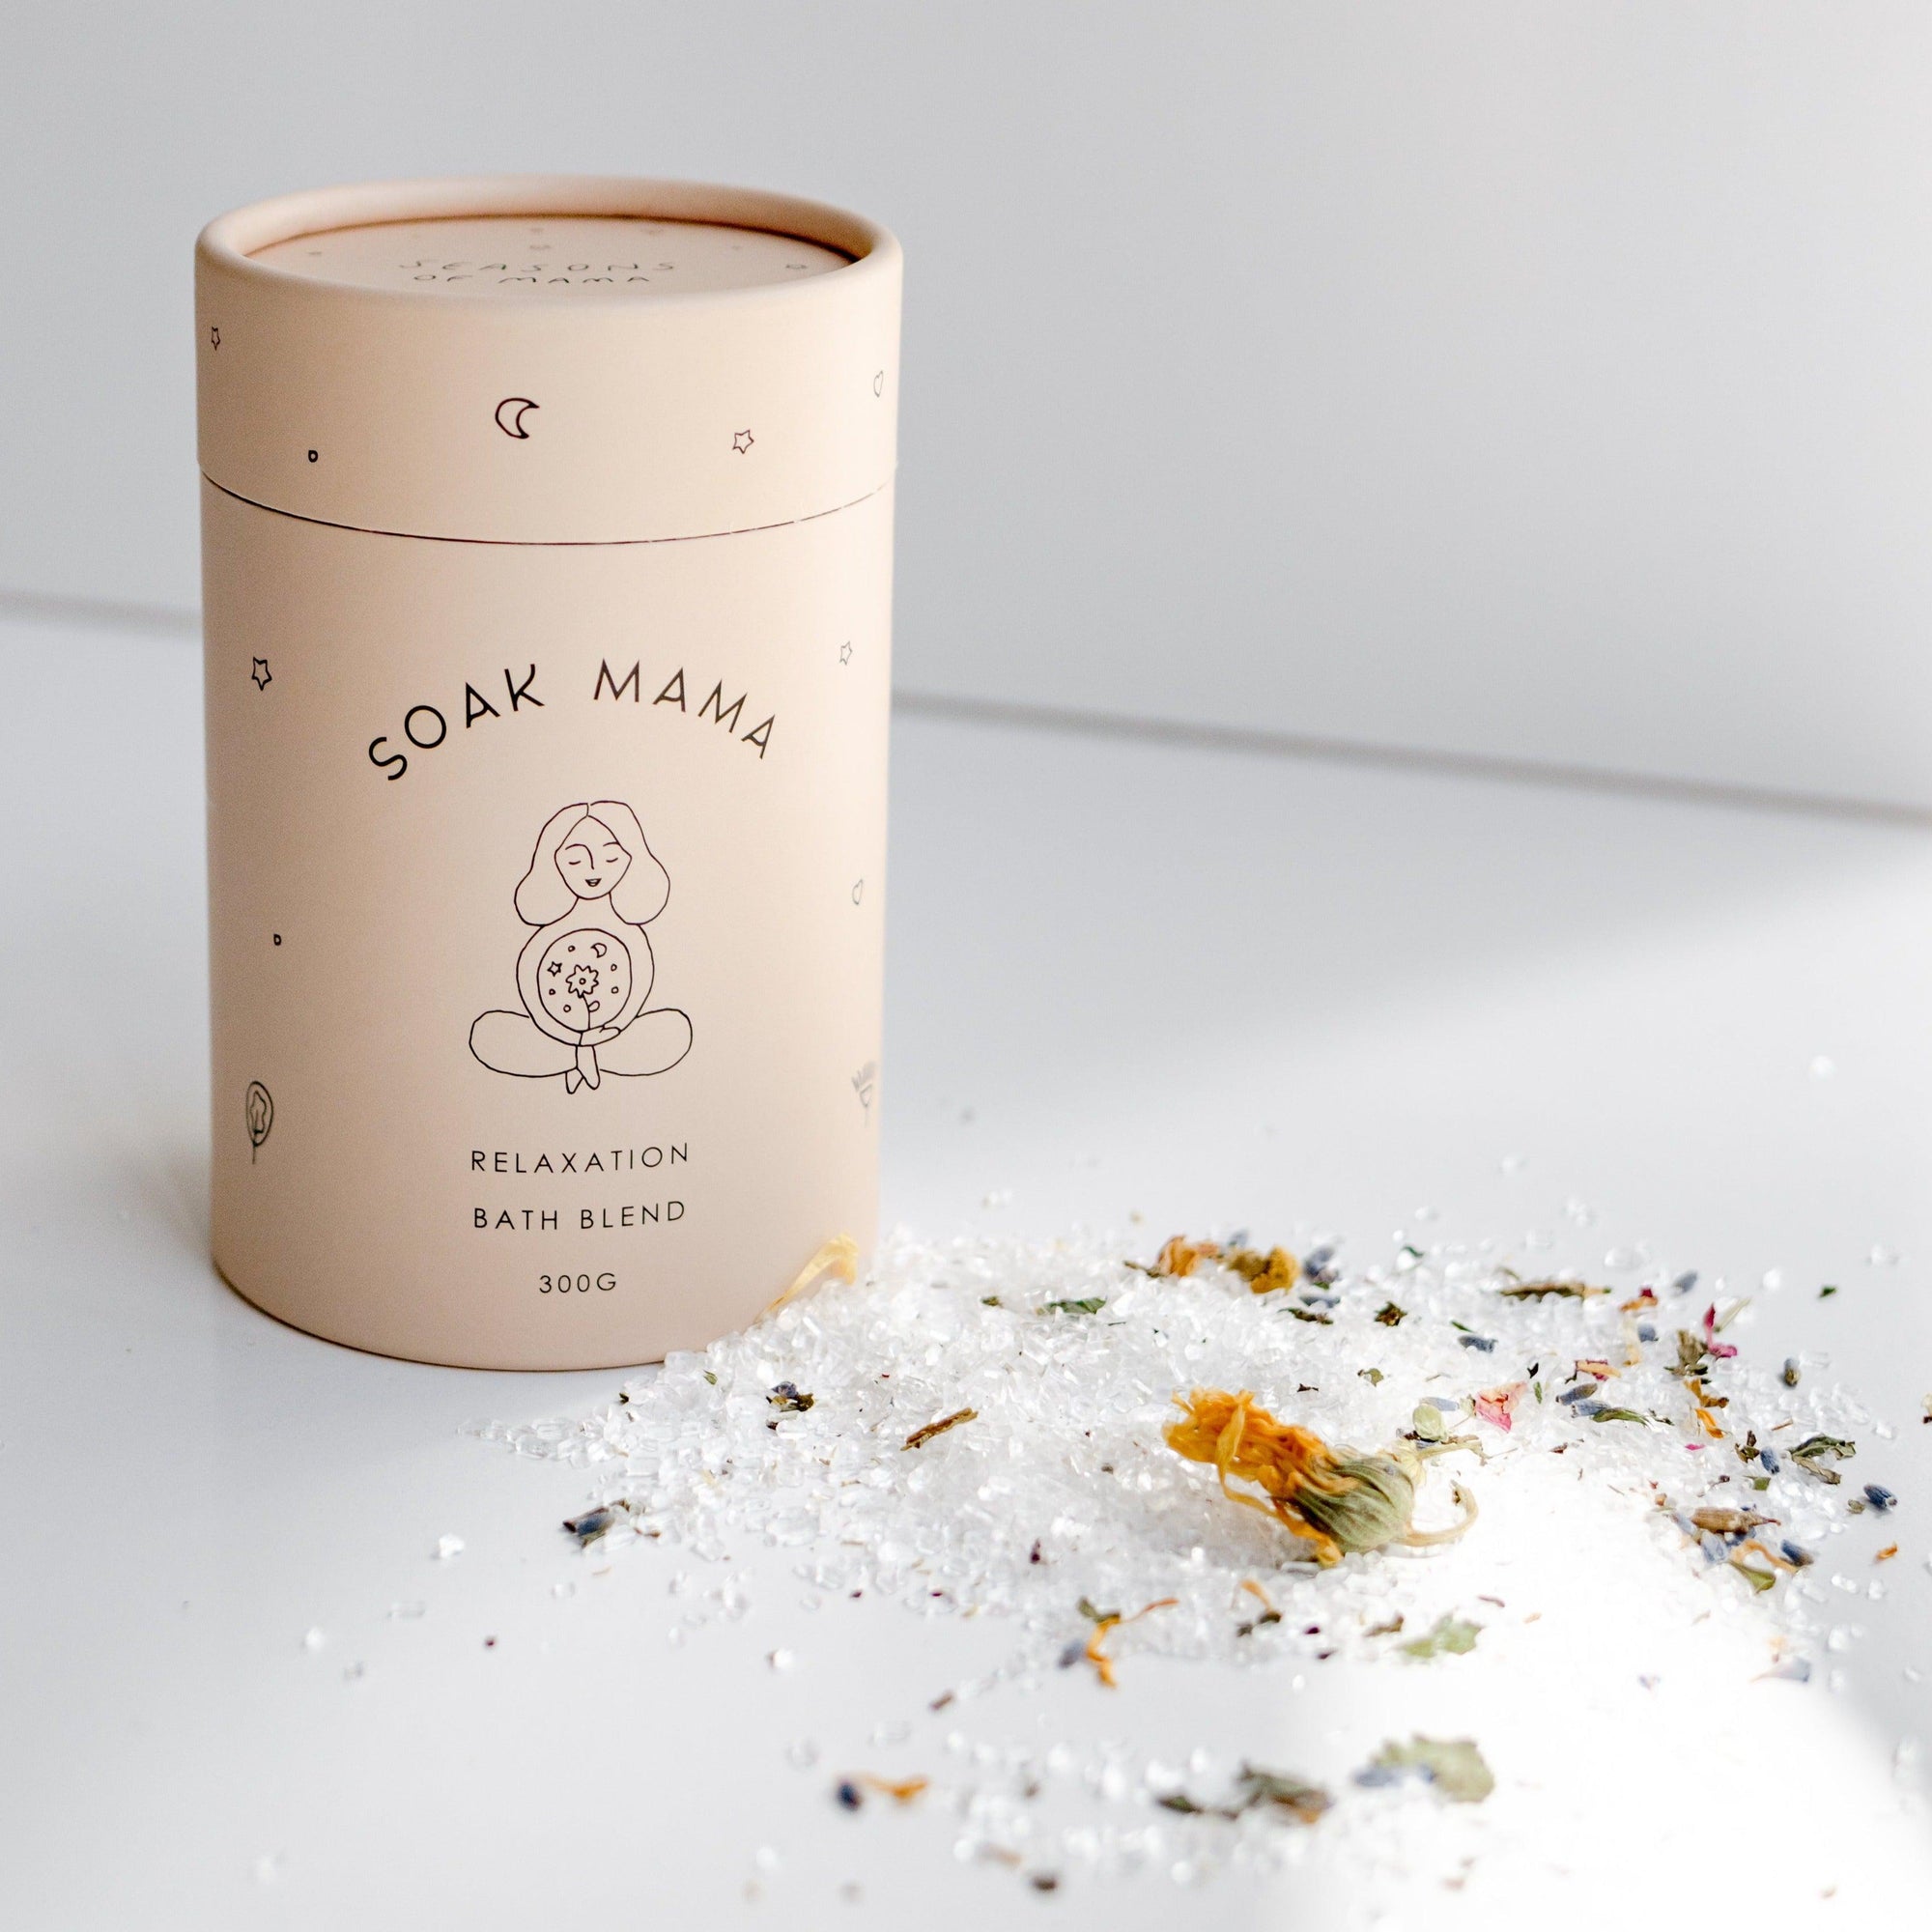 Ideal for pregnancy, postpartum & beyond, this restorative bath soak promotes deep rest & relaxation of the body, mind & spirit. Organic herbs & botanicals are hand blended with pure Ayervedic oil for a nourishing bathing ritual.